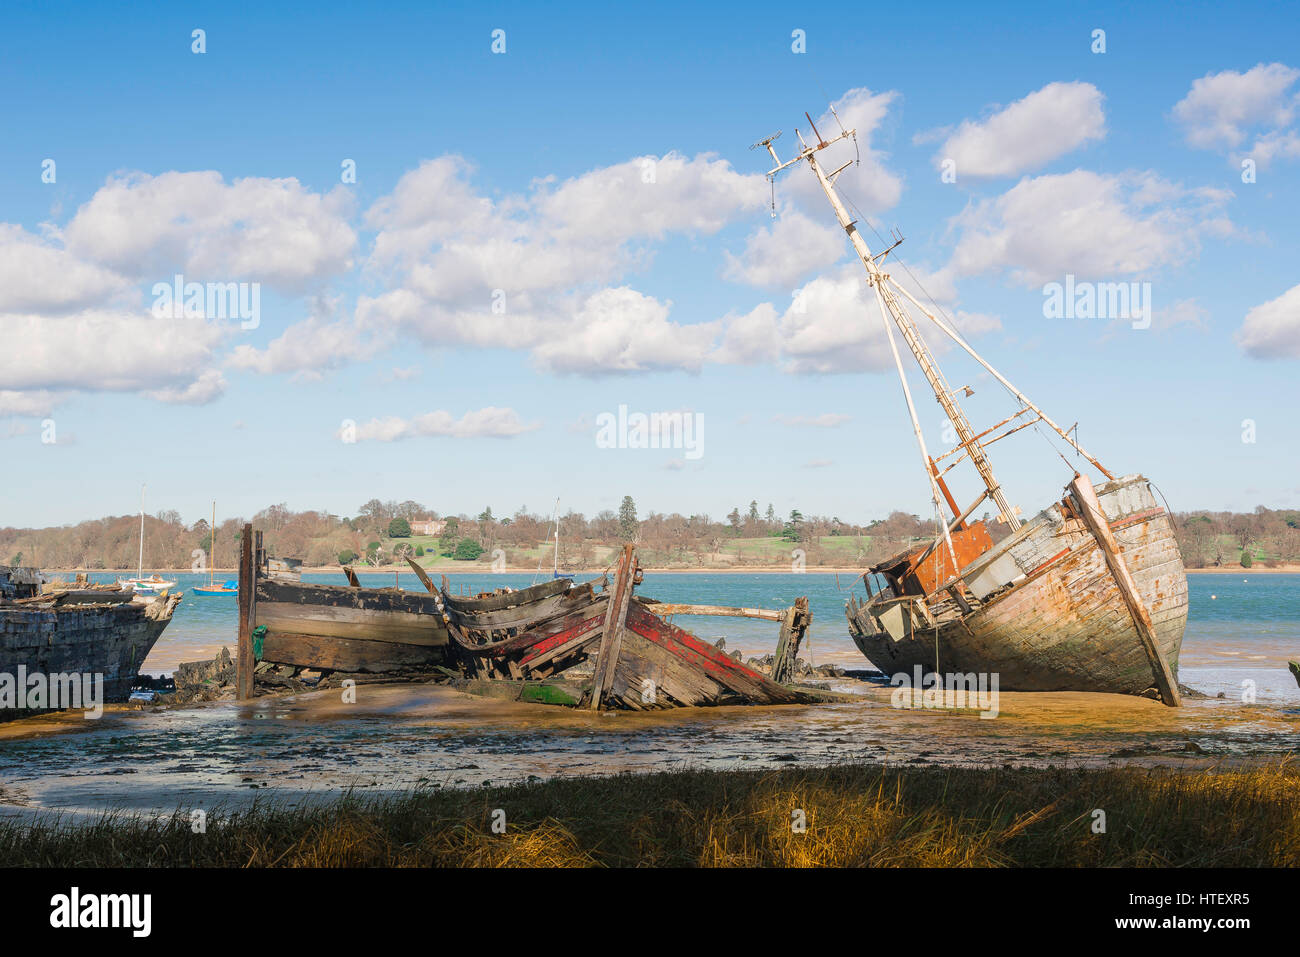 Suffolk landscape UK, view of abandoned sailing boats left to decay along the banks of the River Orwell near Pin Mill, Suffolk, England, UK. Stock Photo